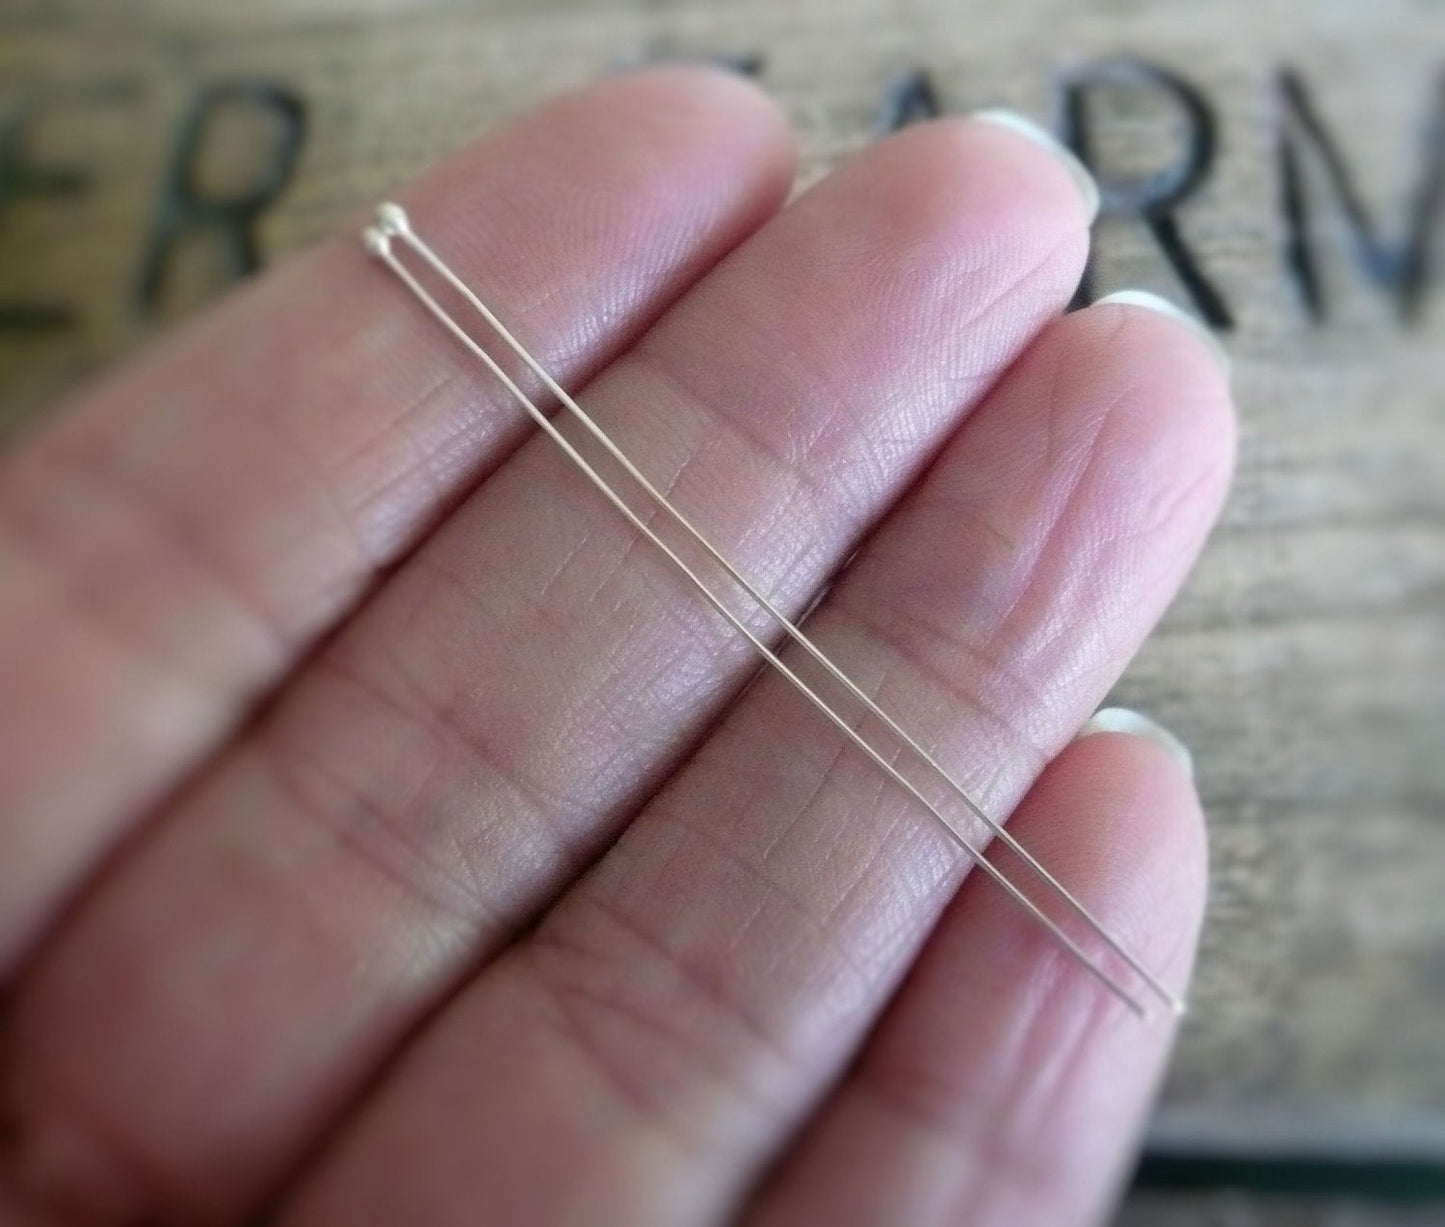 SAMPLE Pack Handmade Ball Headpins - 2 pair each of 24, 26 & 20 gauge, 2 inches. Oxidized and polished